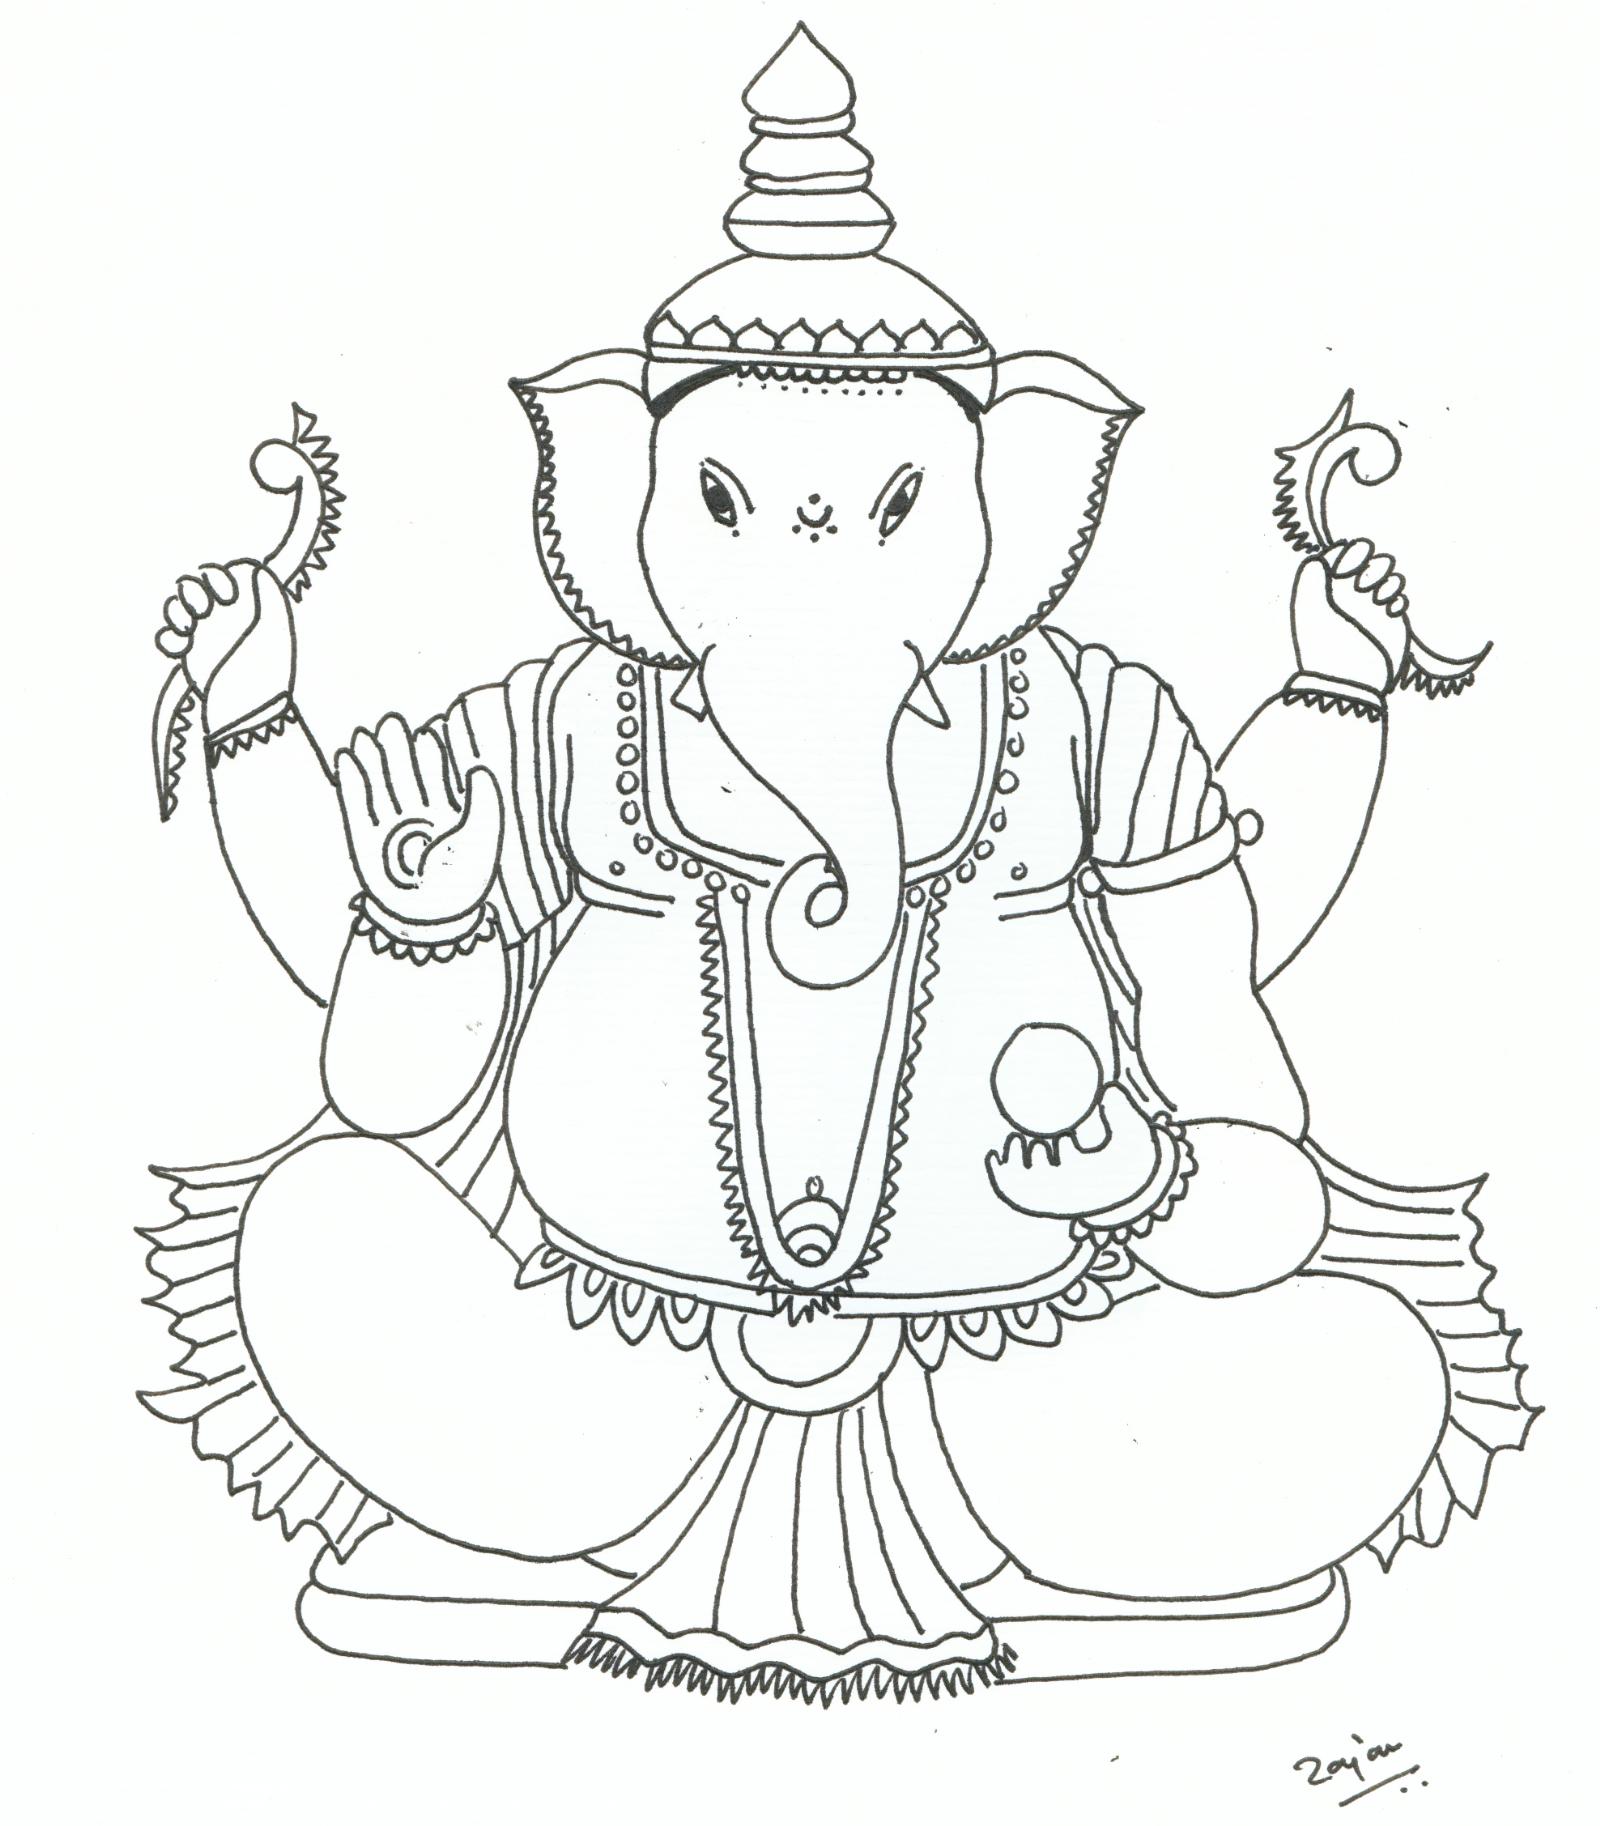 Ganesha coloring pages to download and print for free